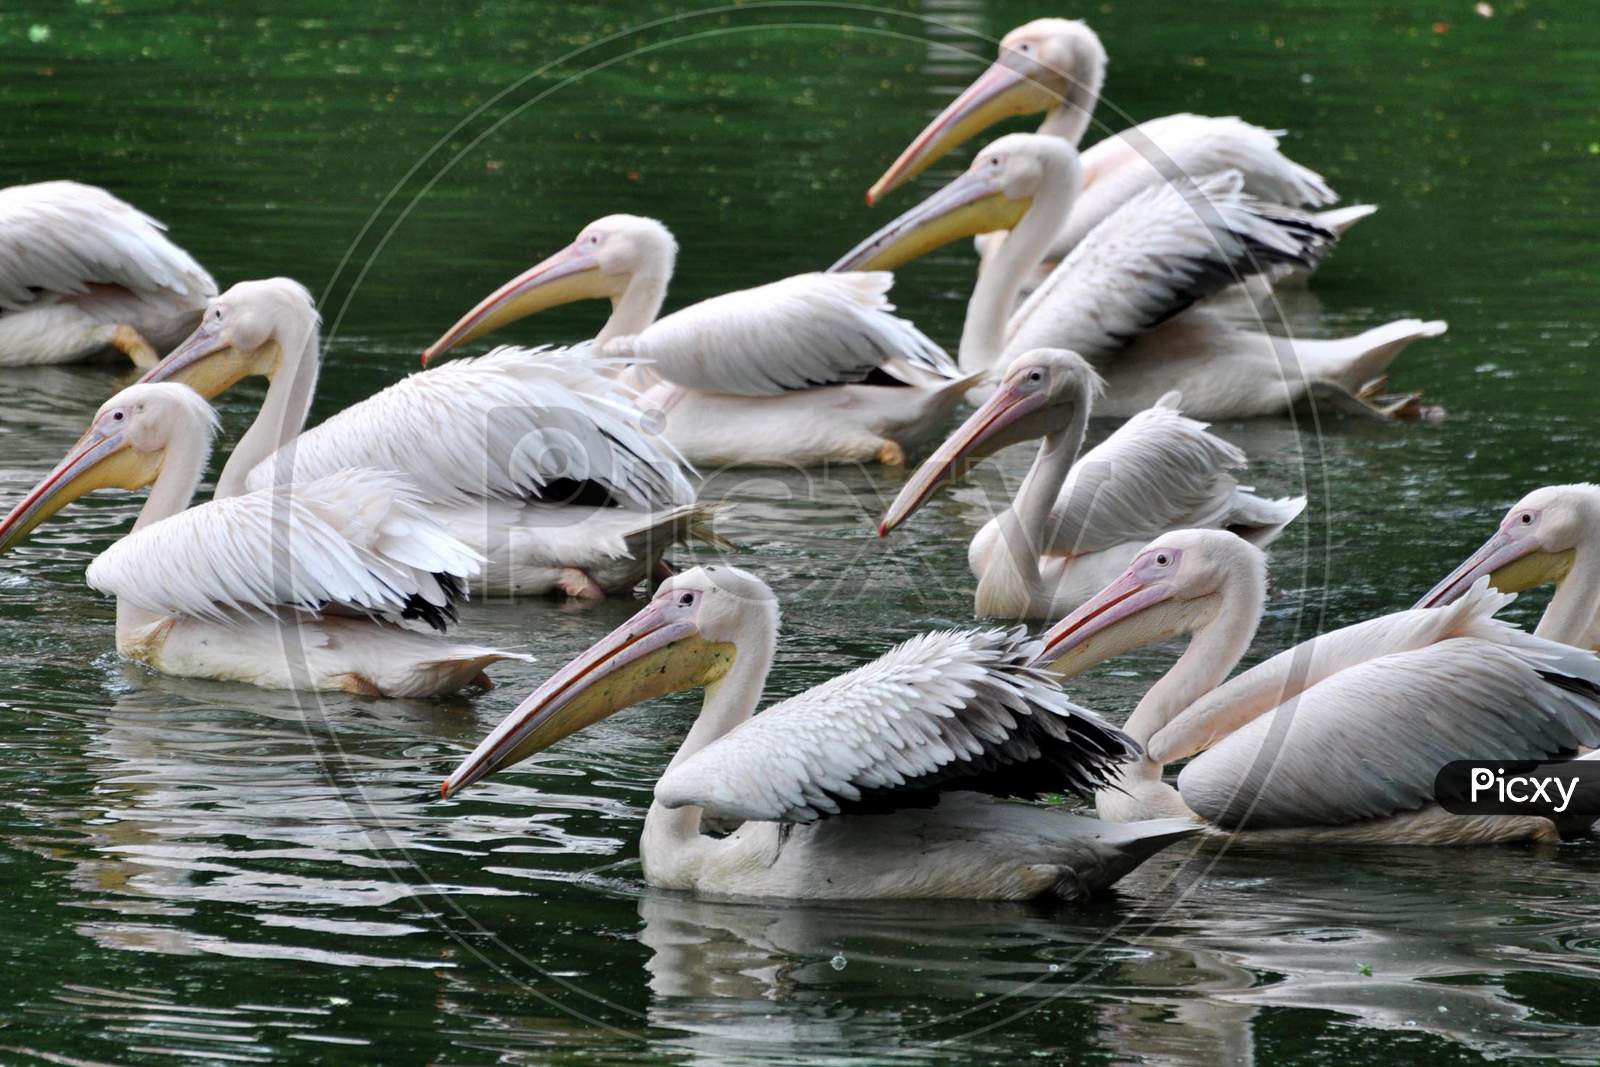 A squadron of rosy pelicans catching fish in an enclosure at a Assam State Zoo cum Botanical Garden in Guwahati, Assam on July 04, 2020